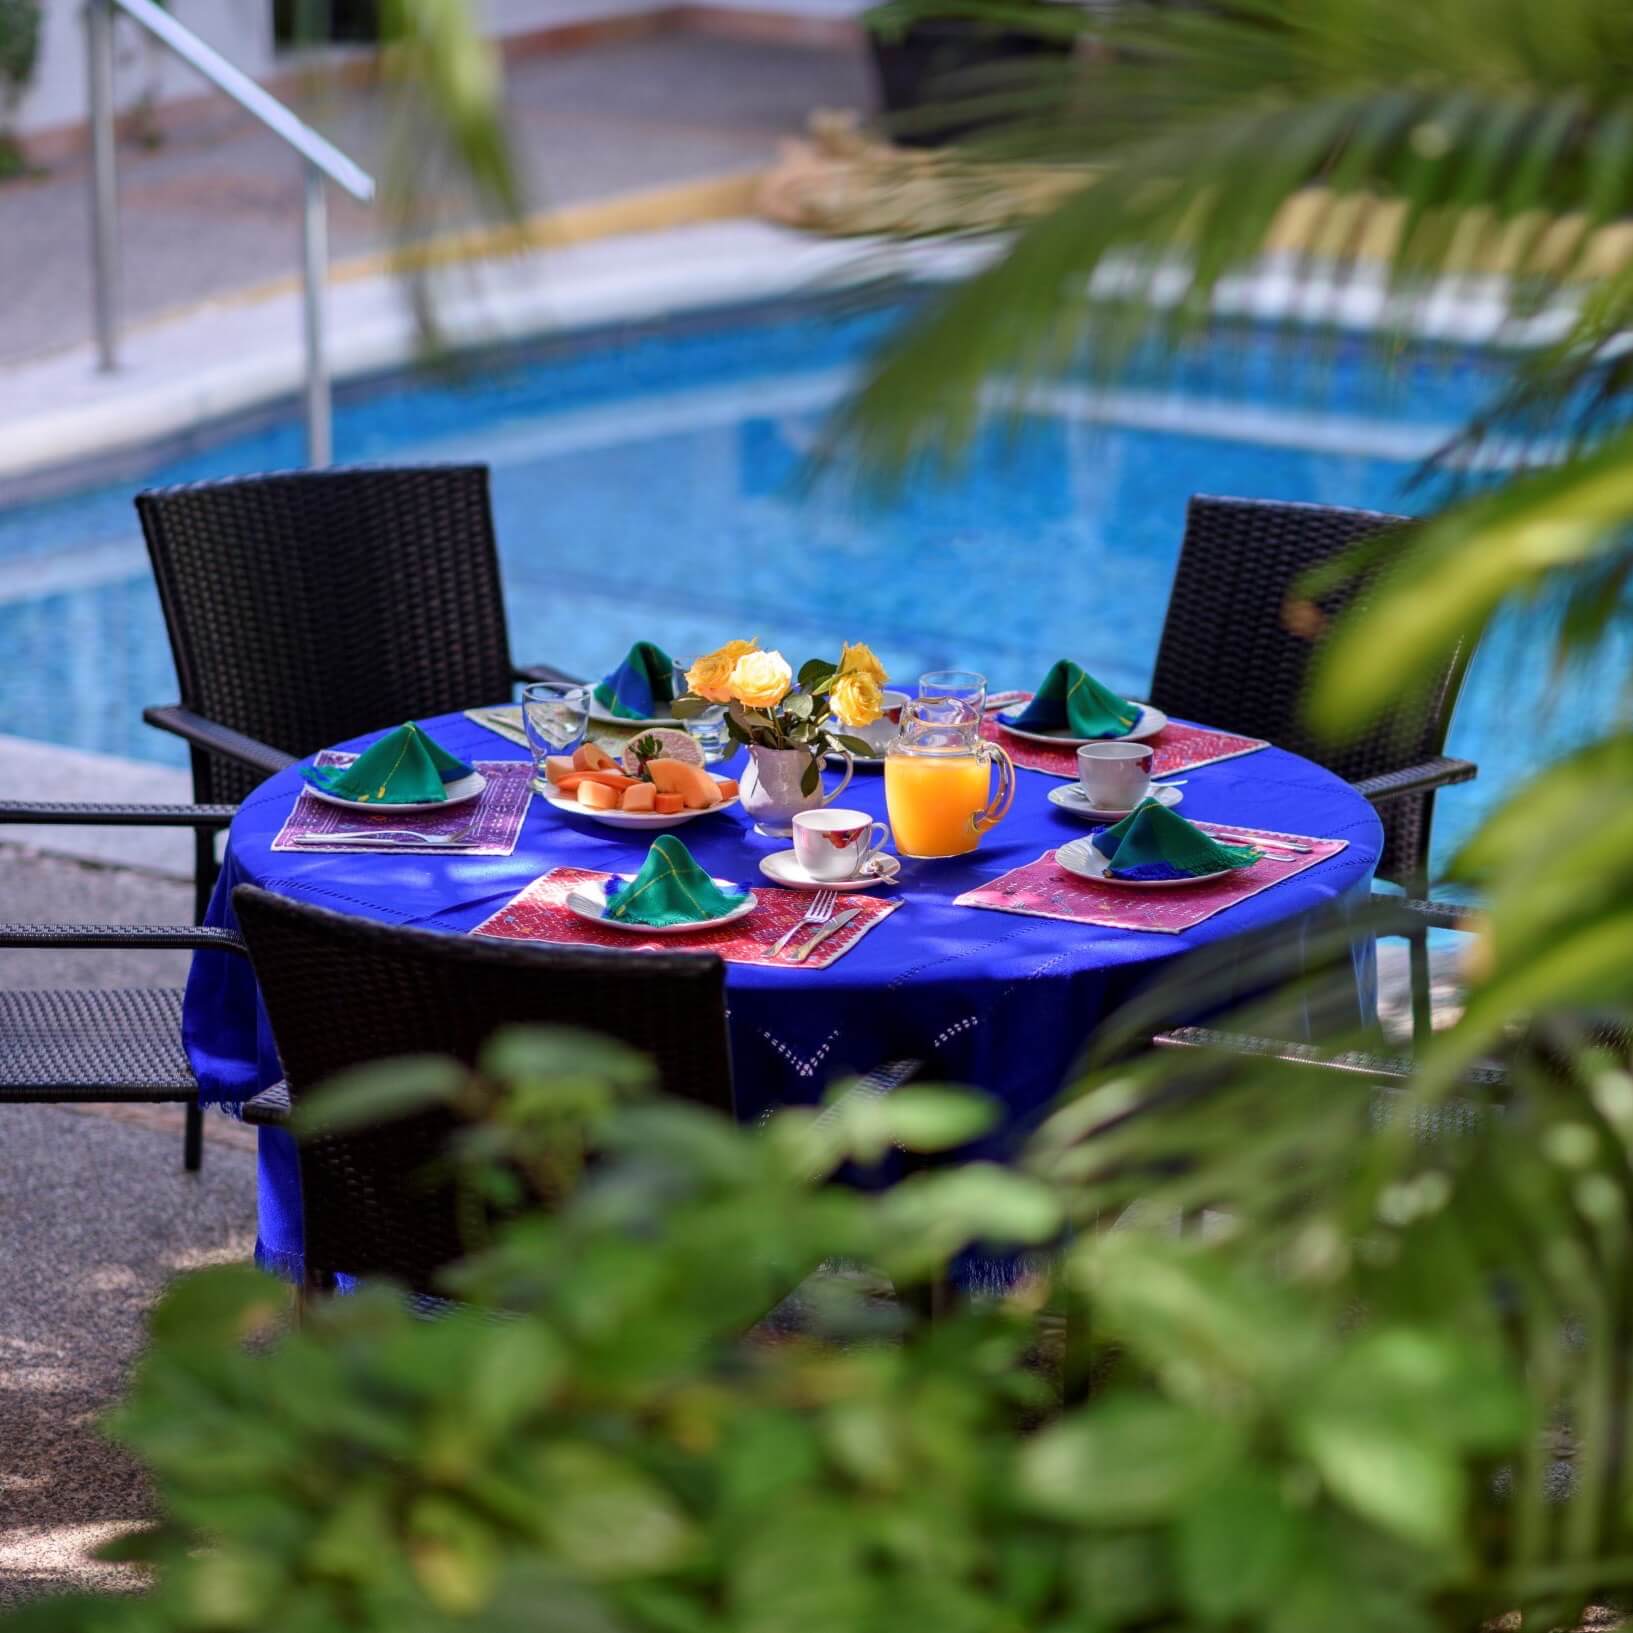 A breakfast table set by the poolside